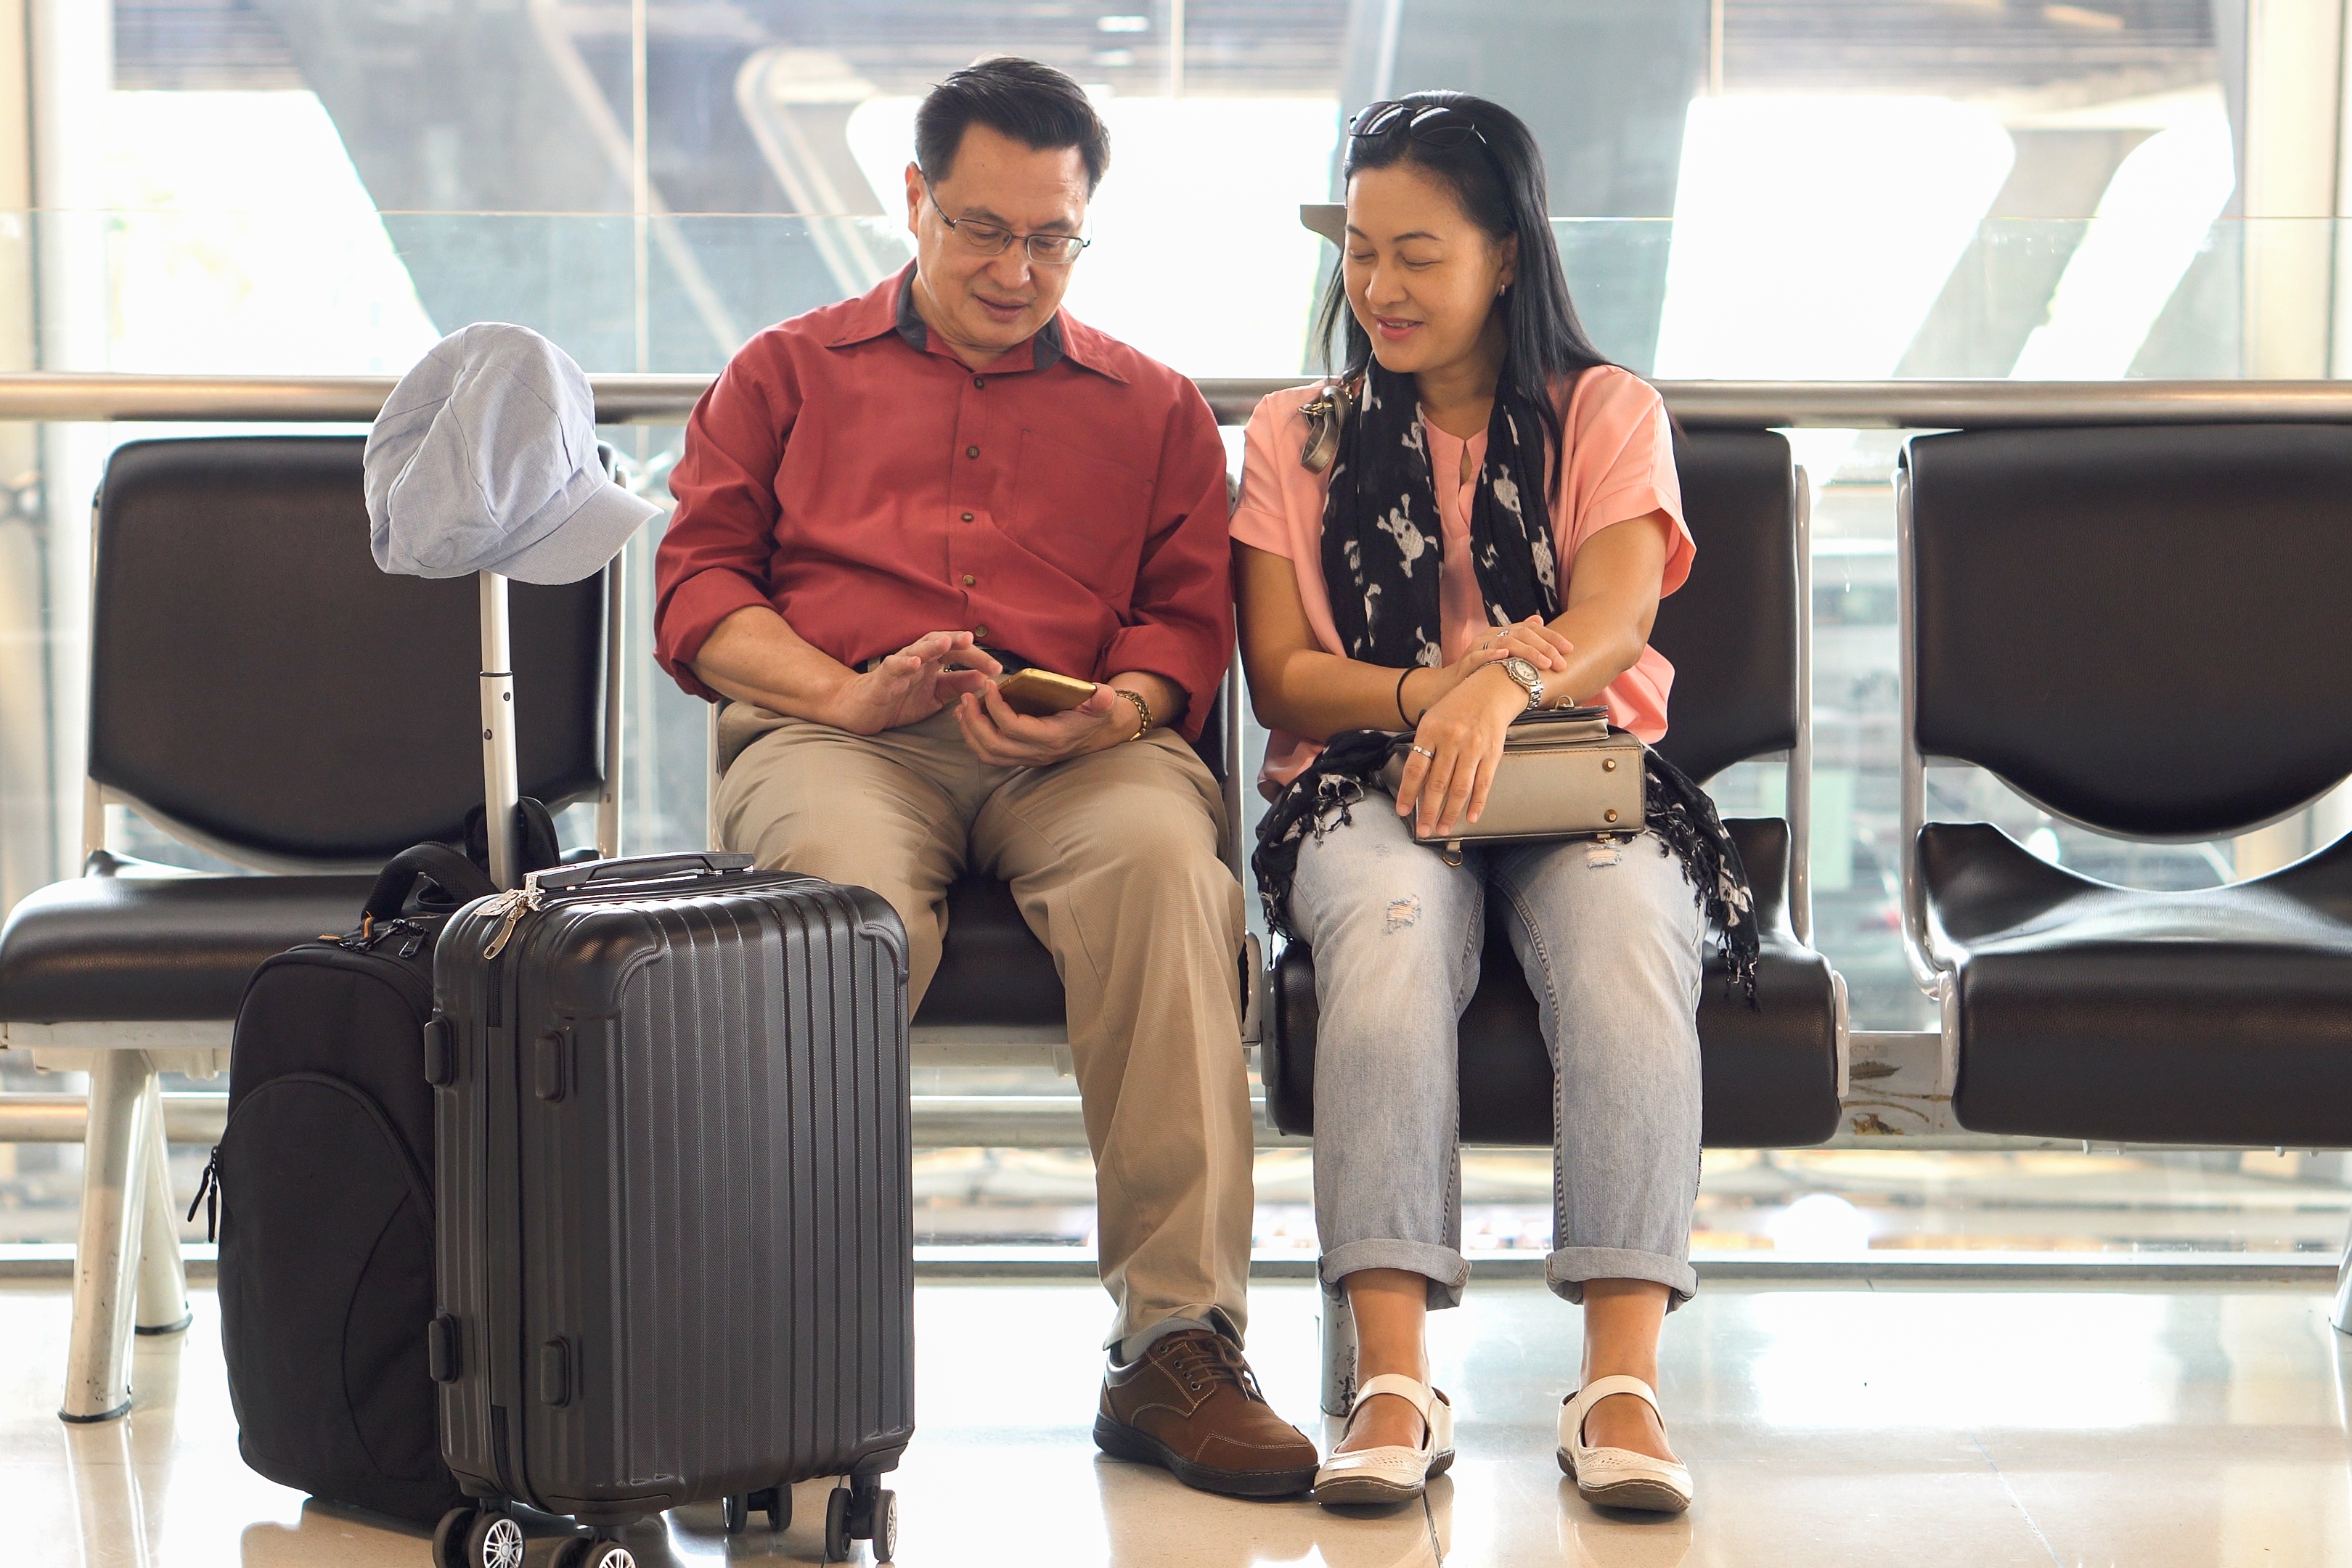 Couple with luggage waiting at airport